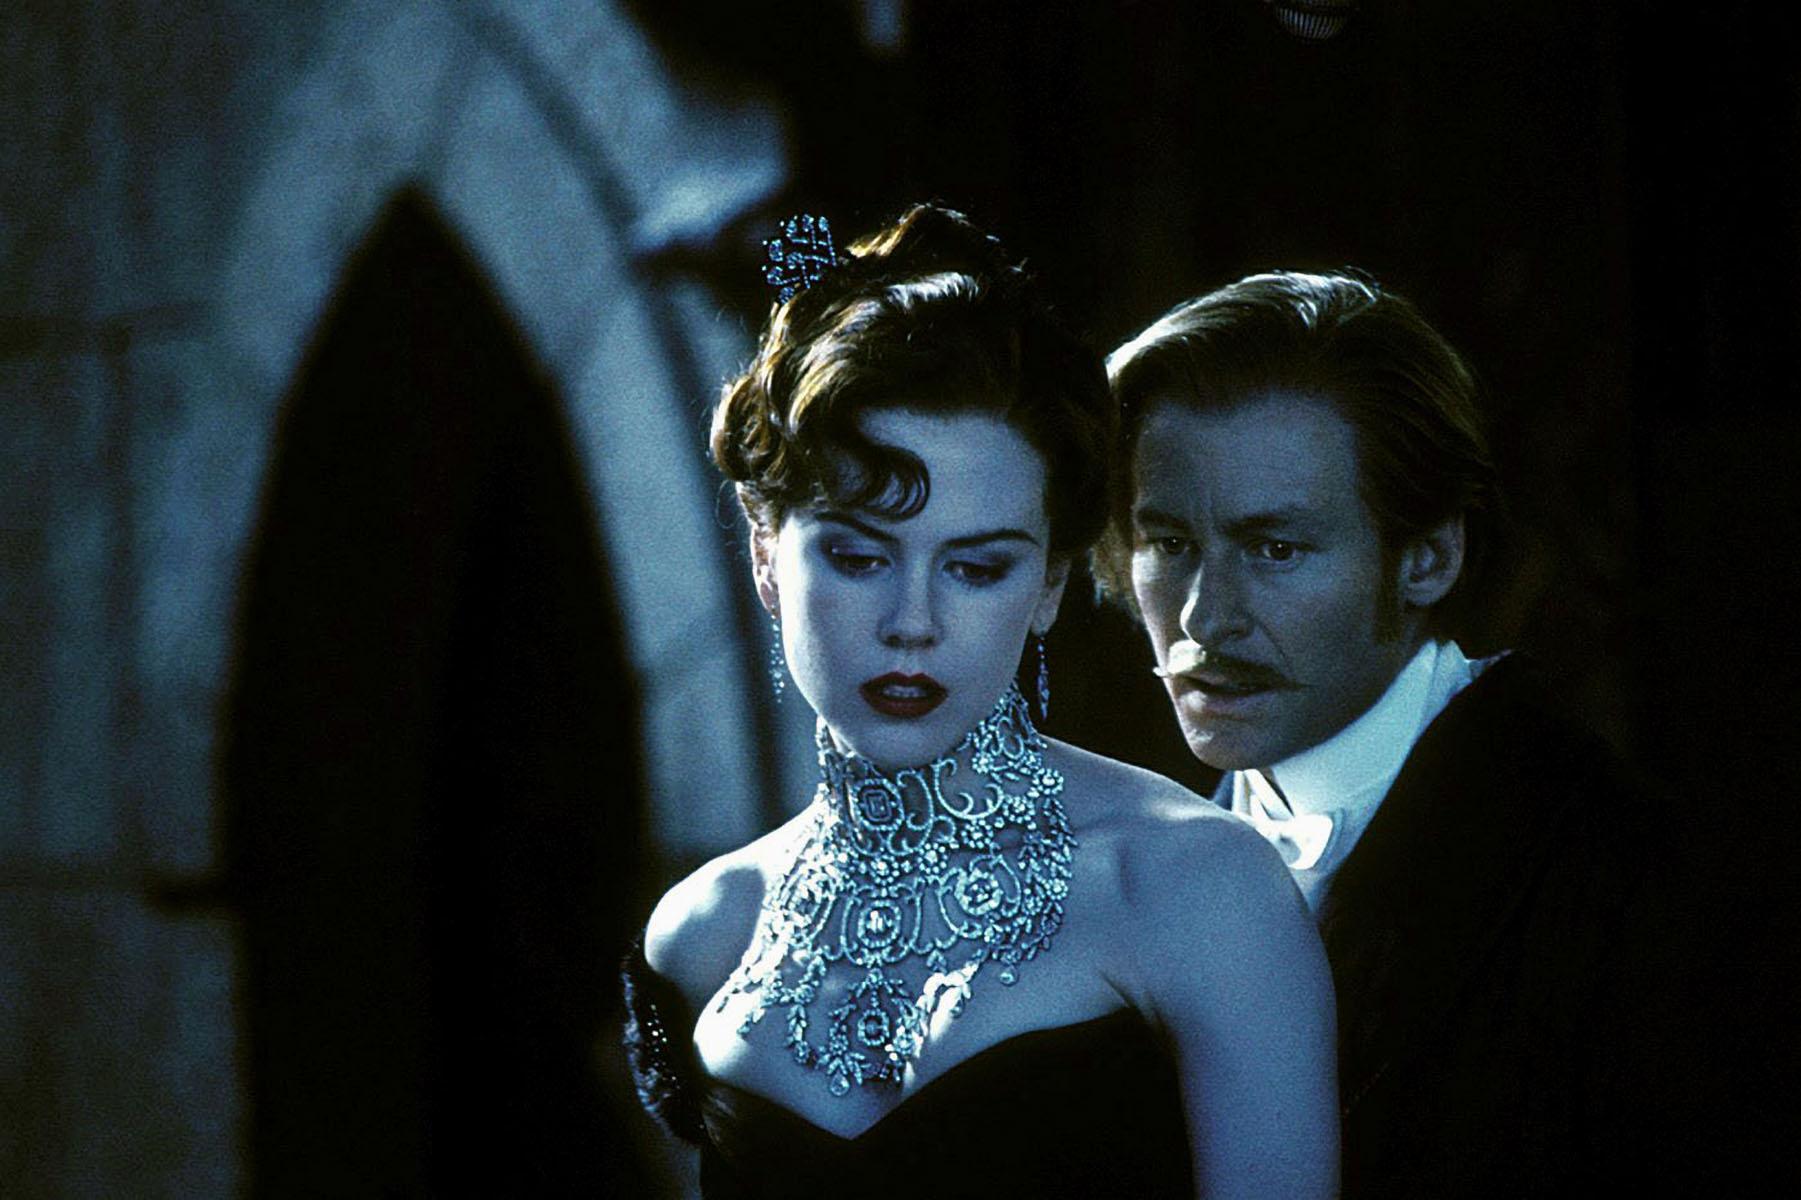 Movies in Diamonds Nicole Kidman wearing the Satin diamond necklace by Stefano Canturi in 'Moulin Rouge'. 